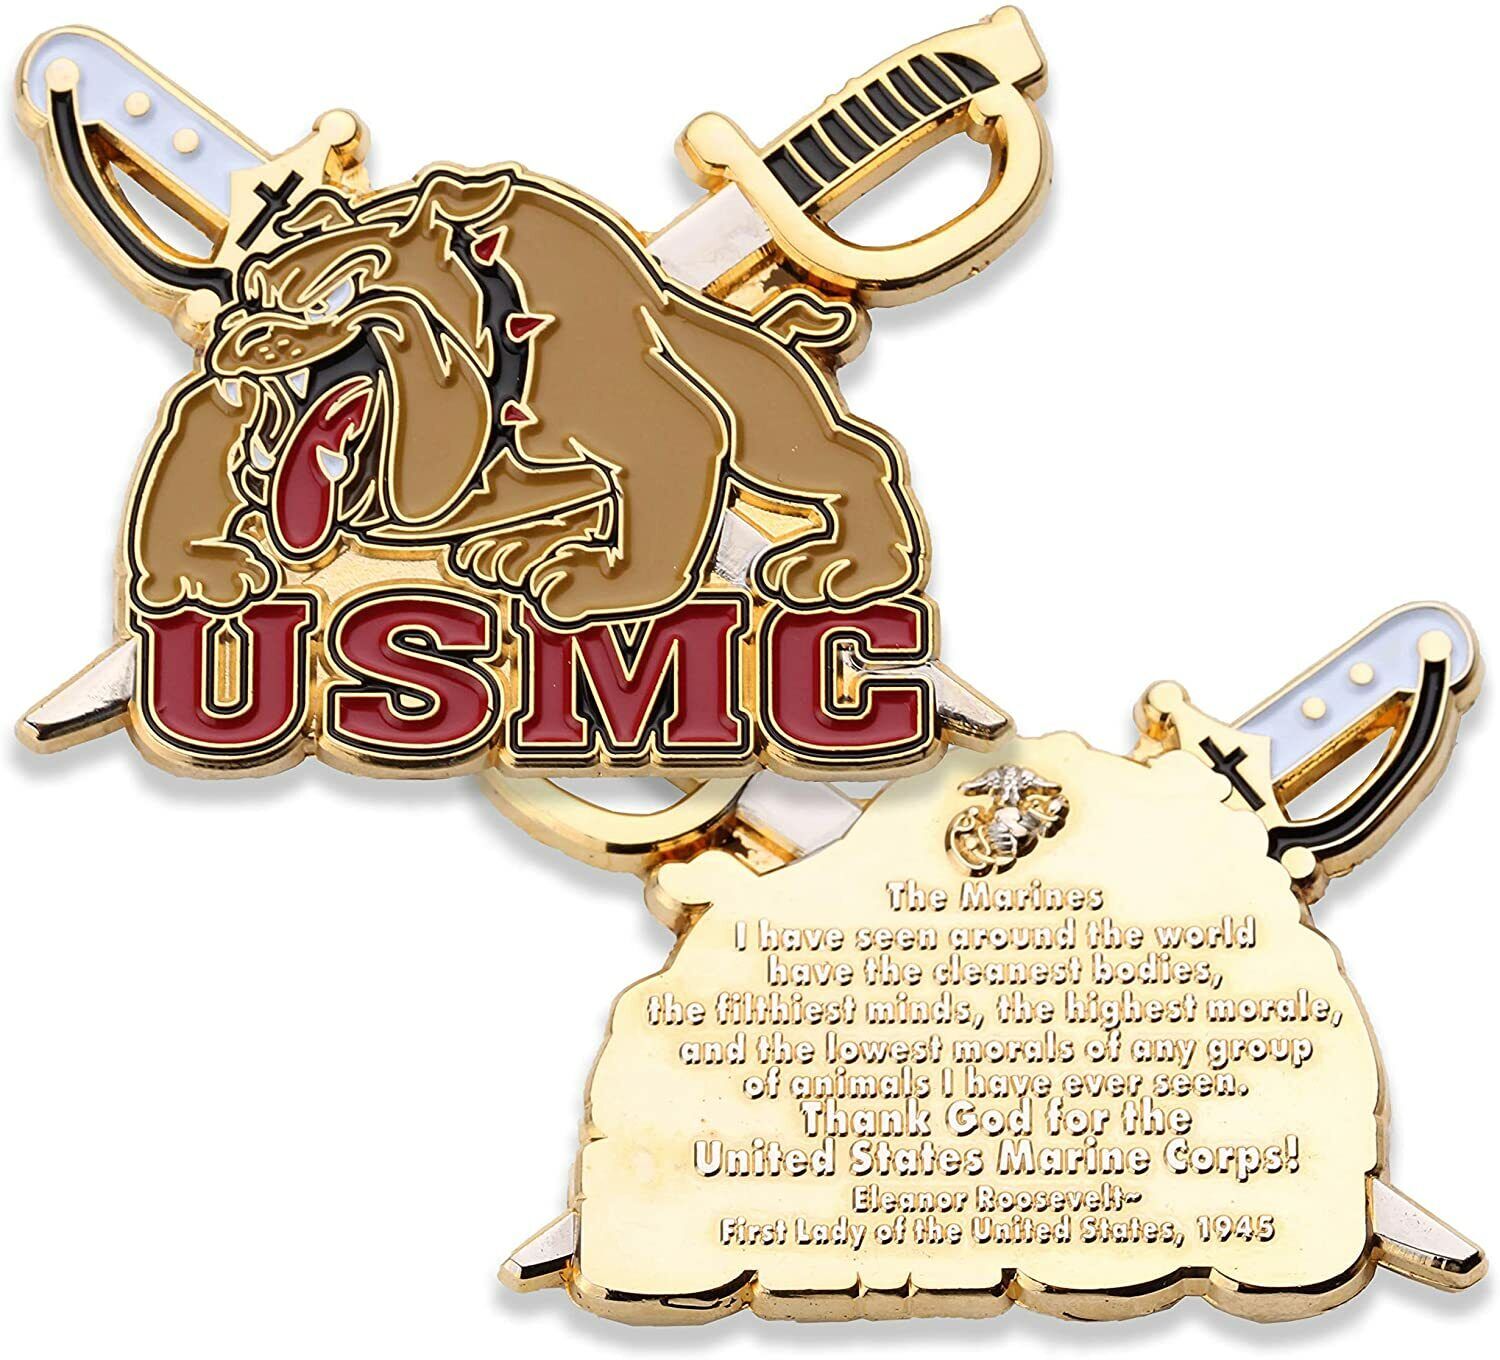 USMC Mascot Crossed Swords Officially Licensed Challenge Coin 